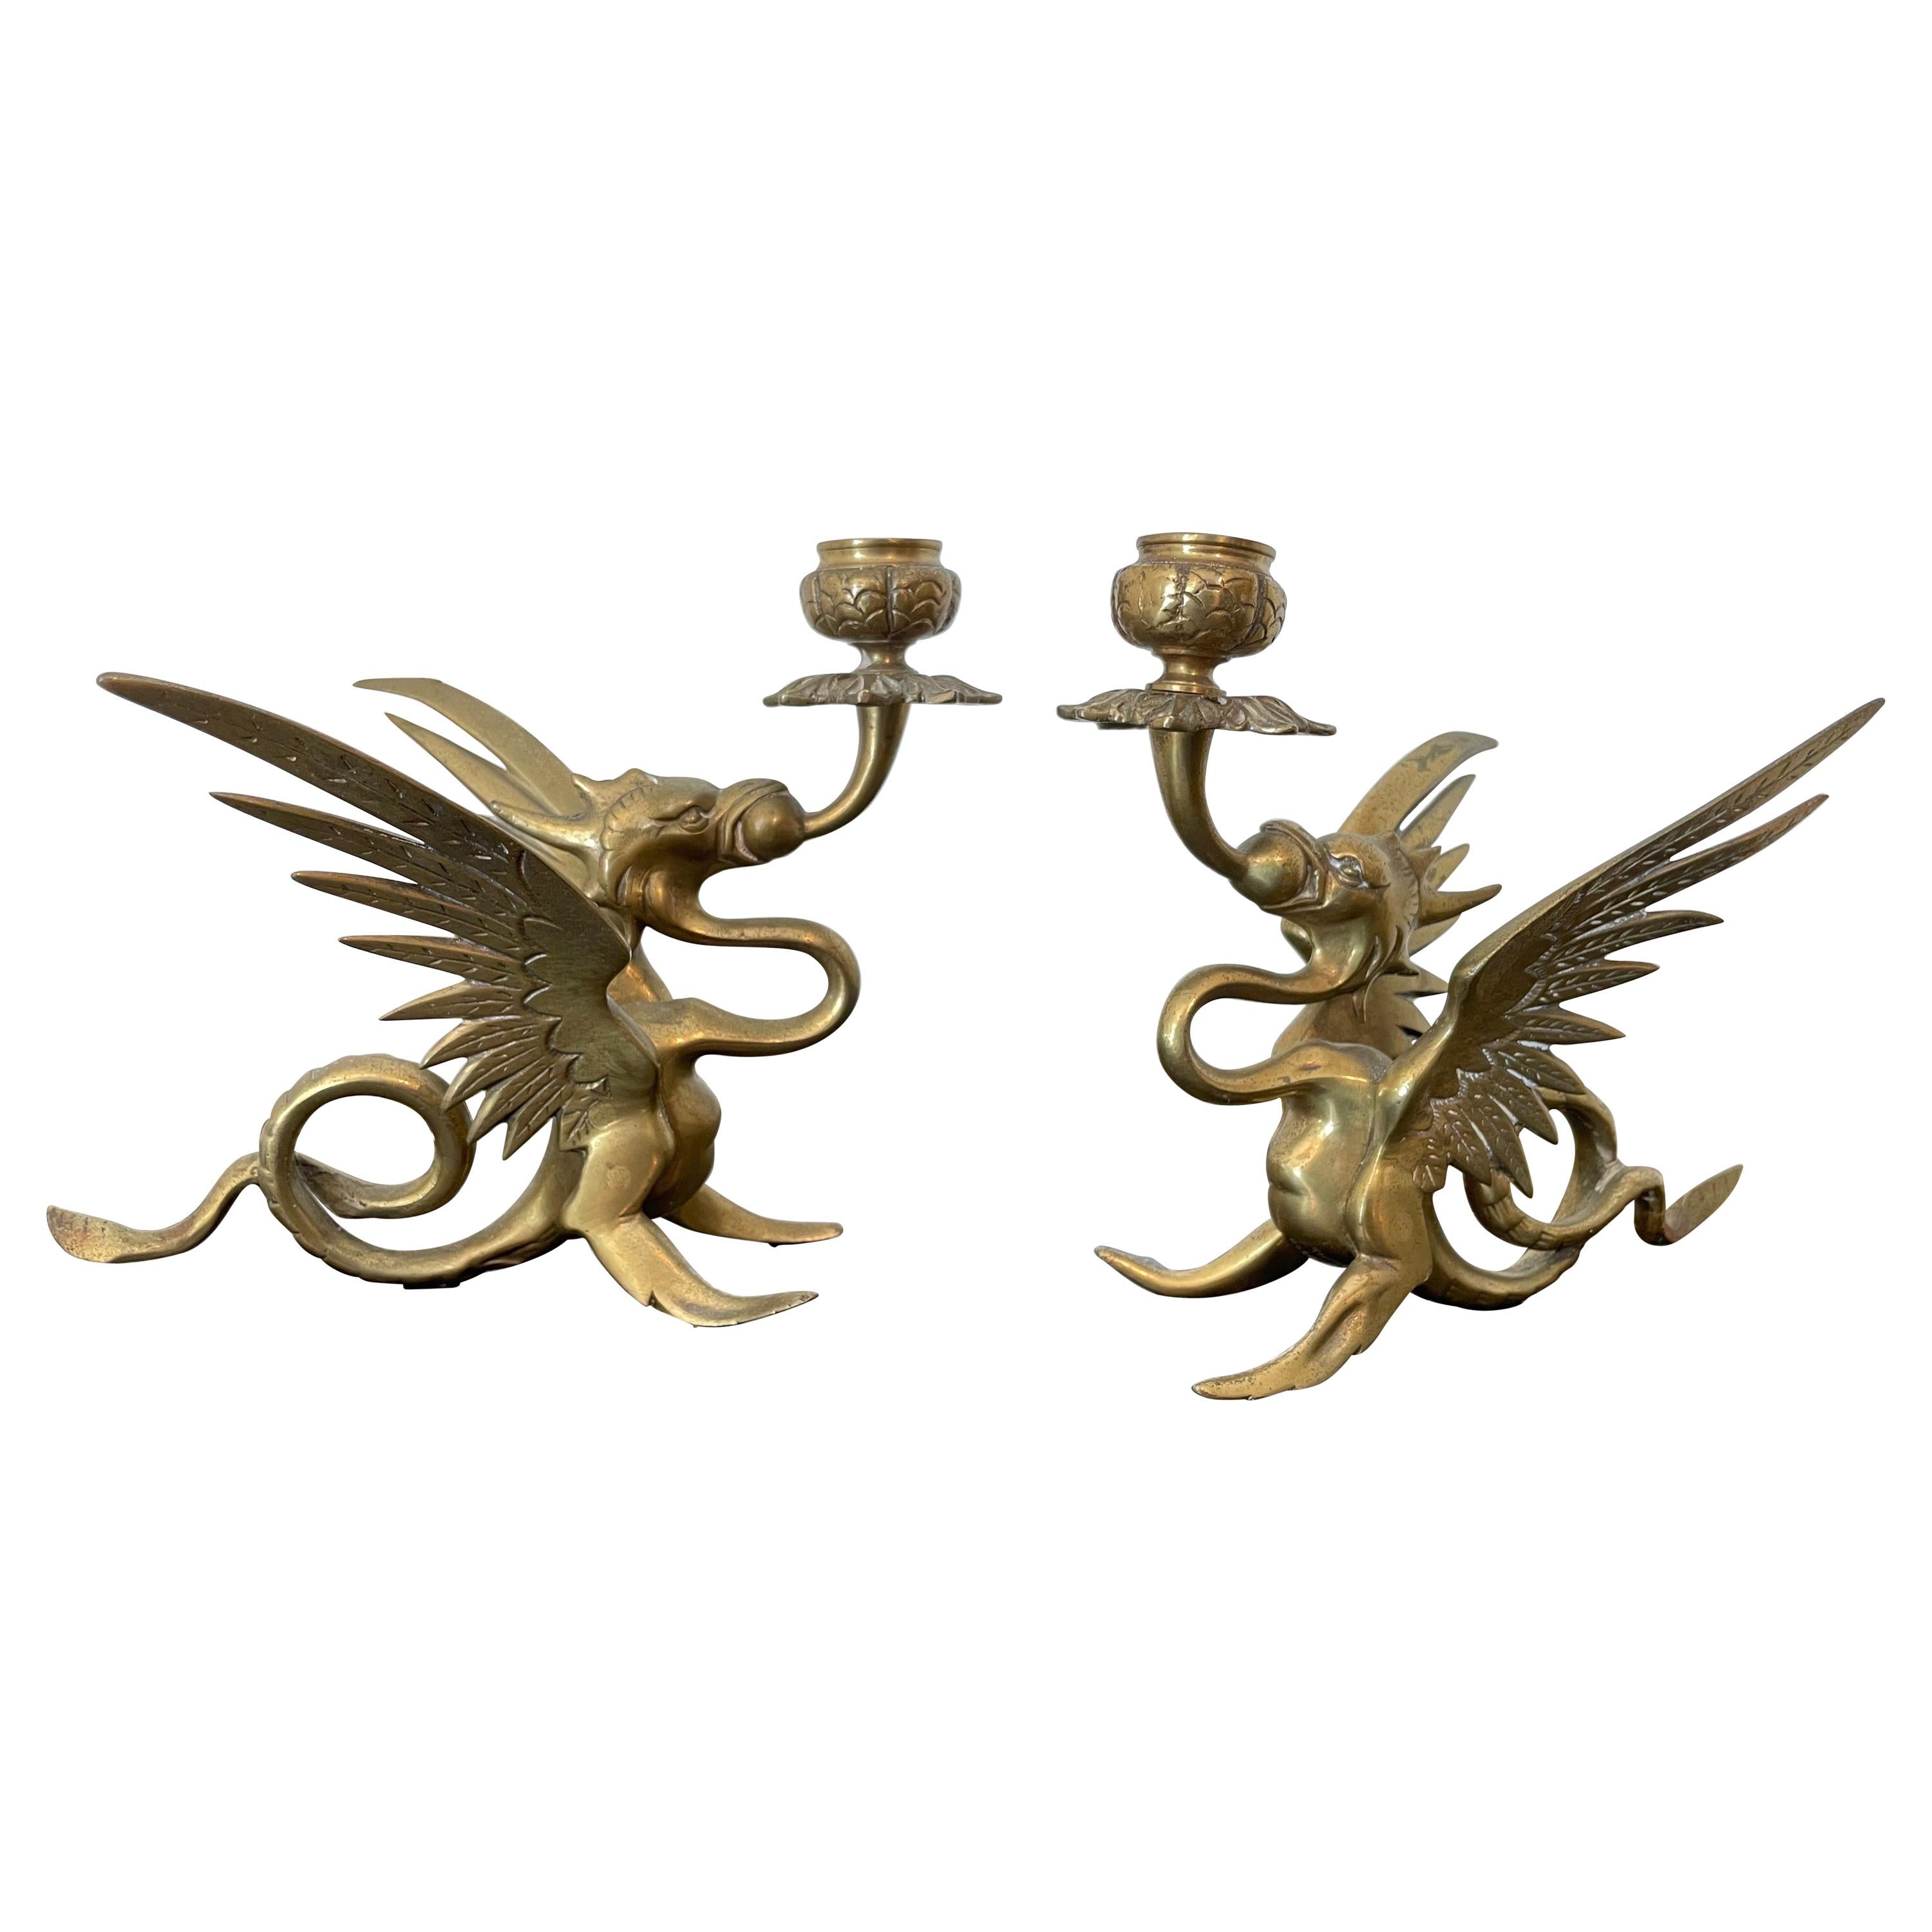 Pair of Brass Griffin Candlesticks by Tiffany & Co.